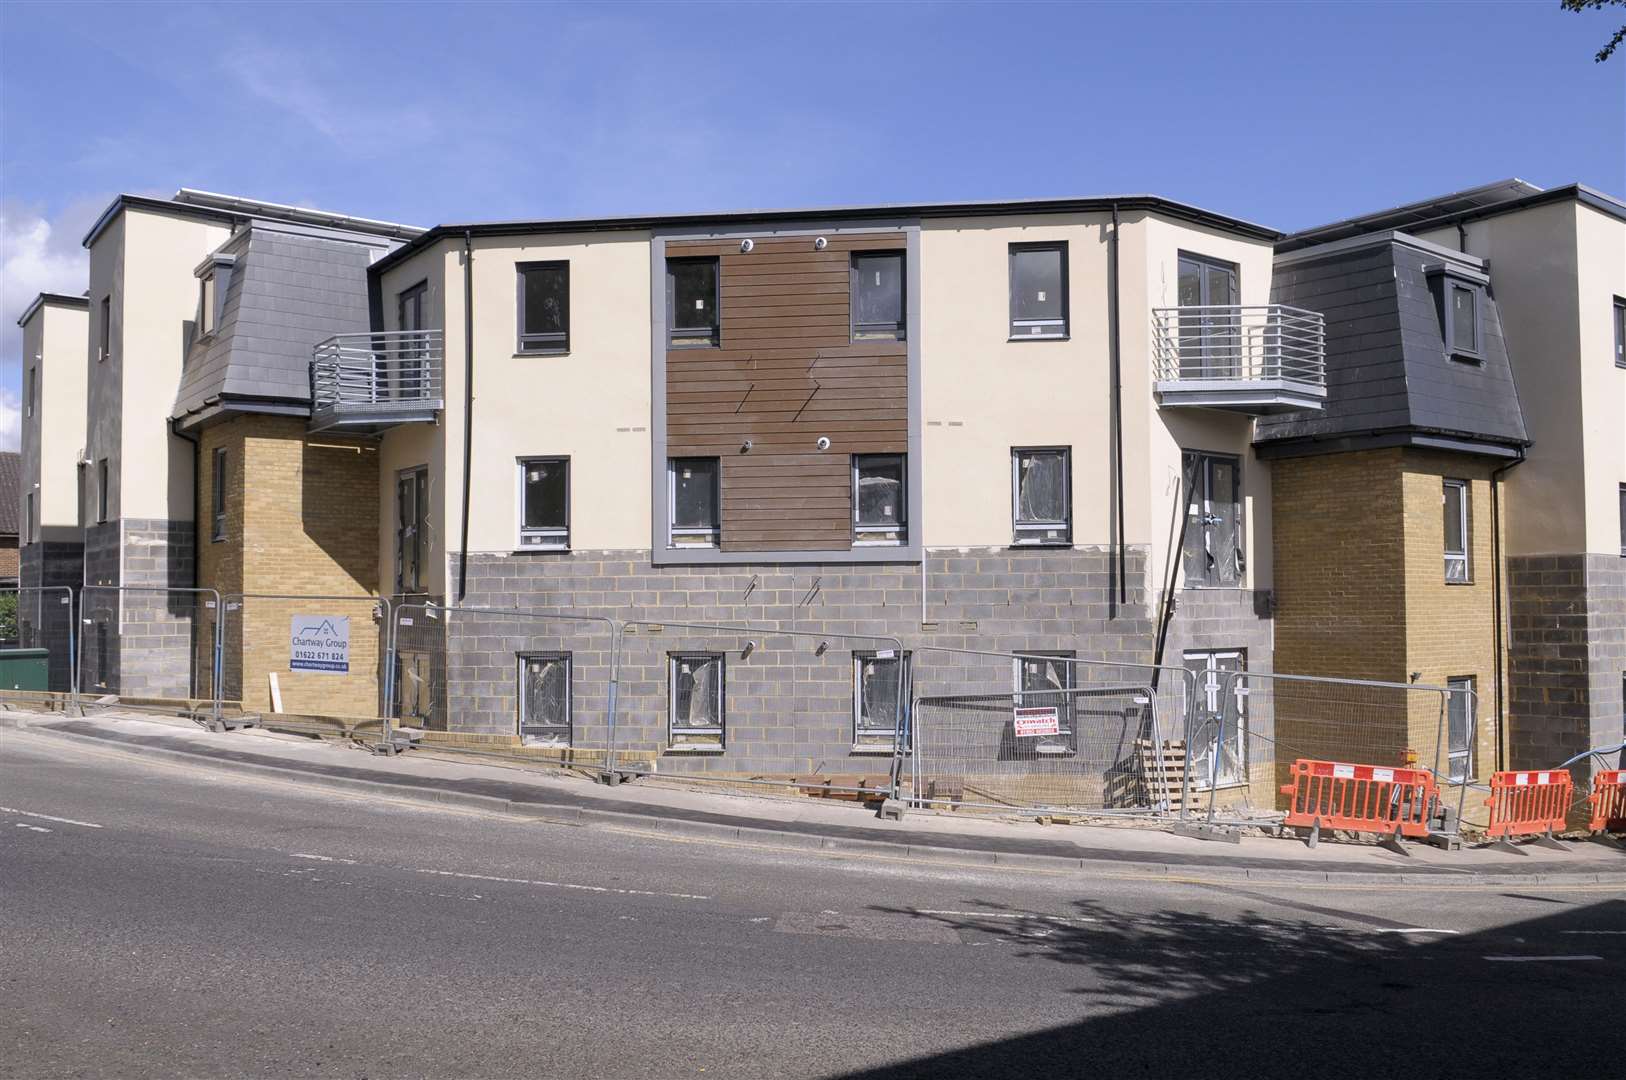 The flats as they approached the end of construction in 2014